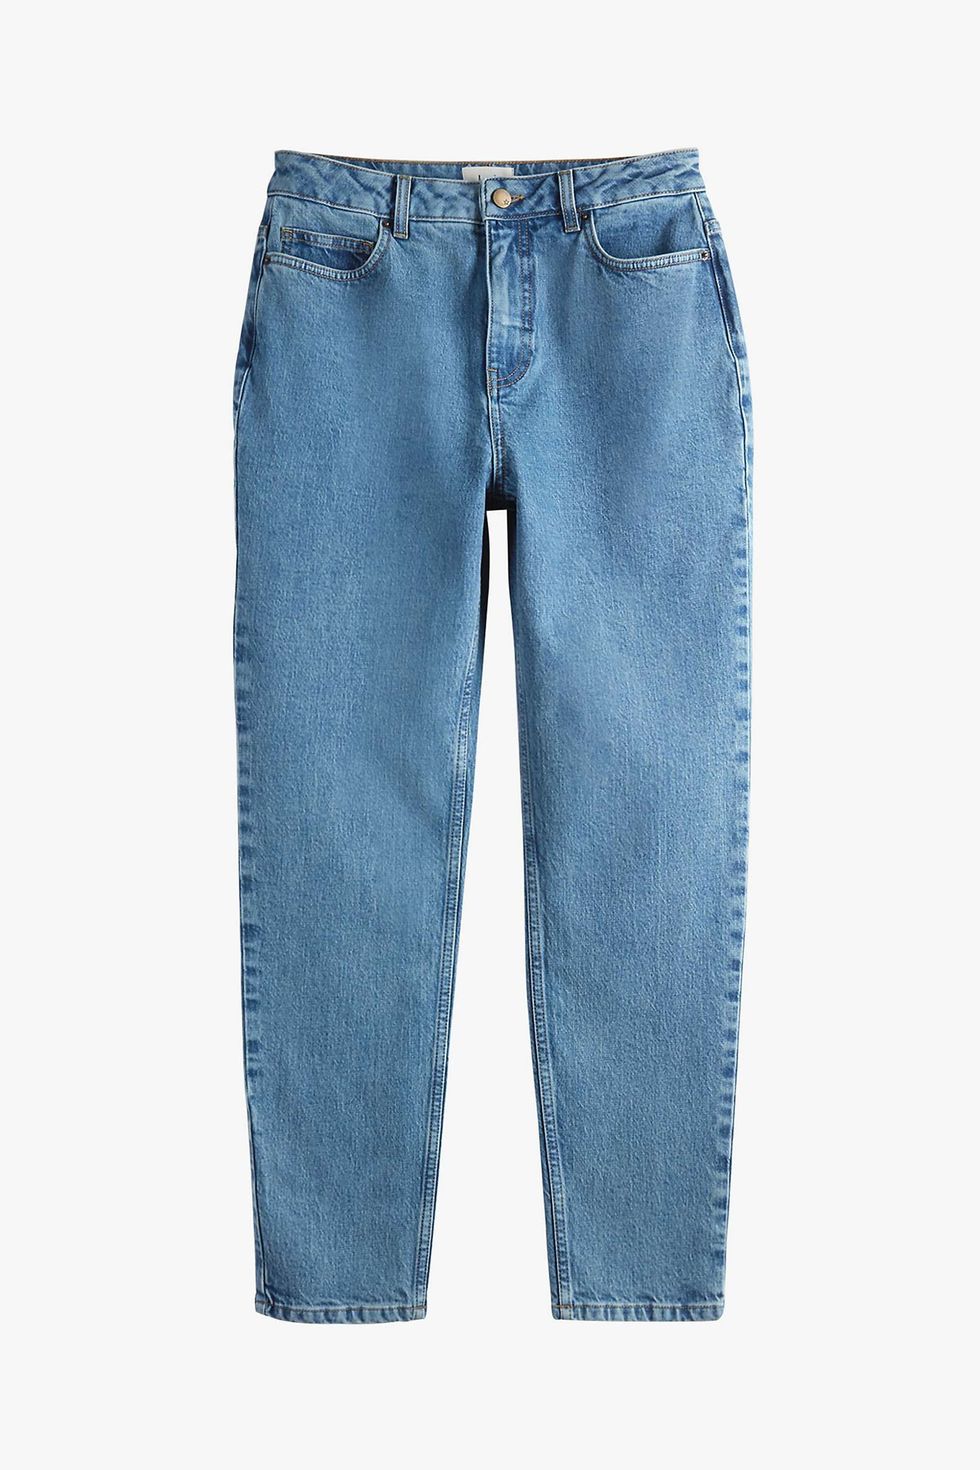 25 Best Mom Jeans for 2023, Plus How to Wear Them